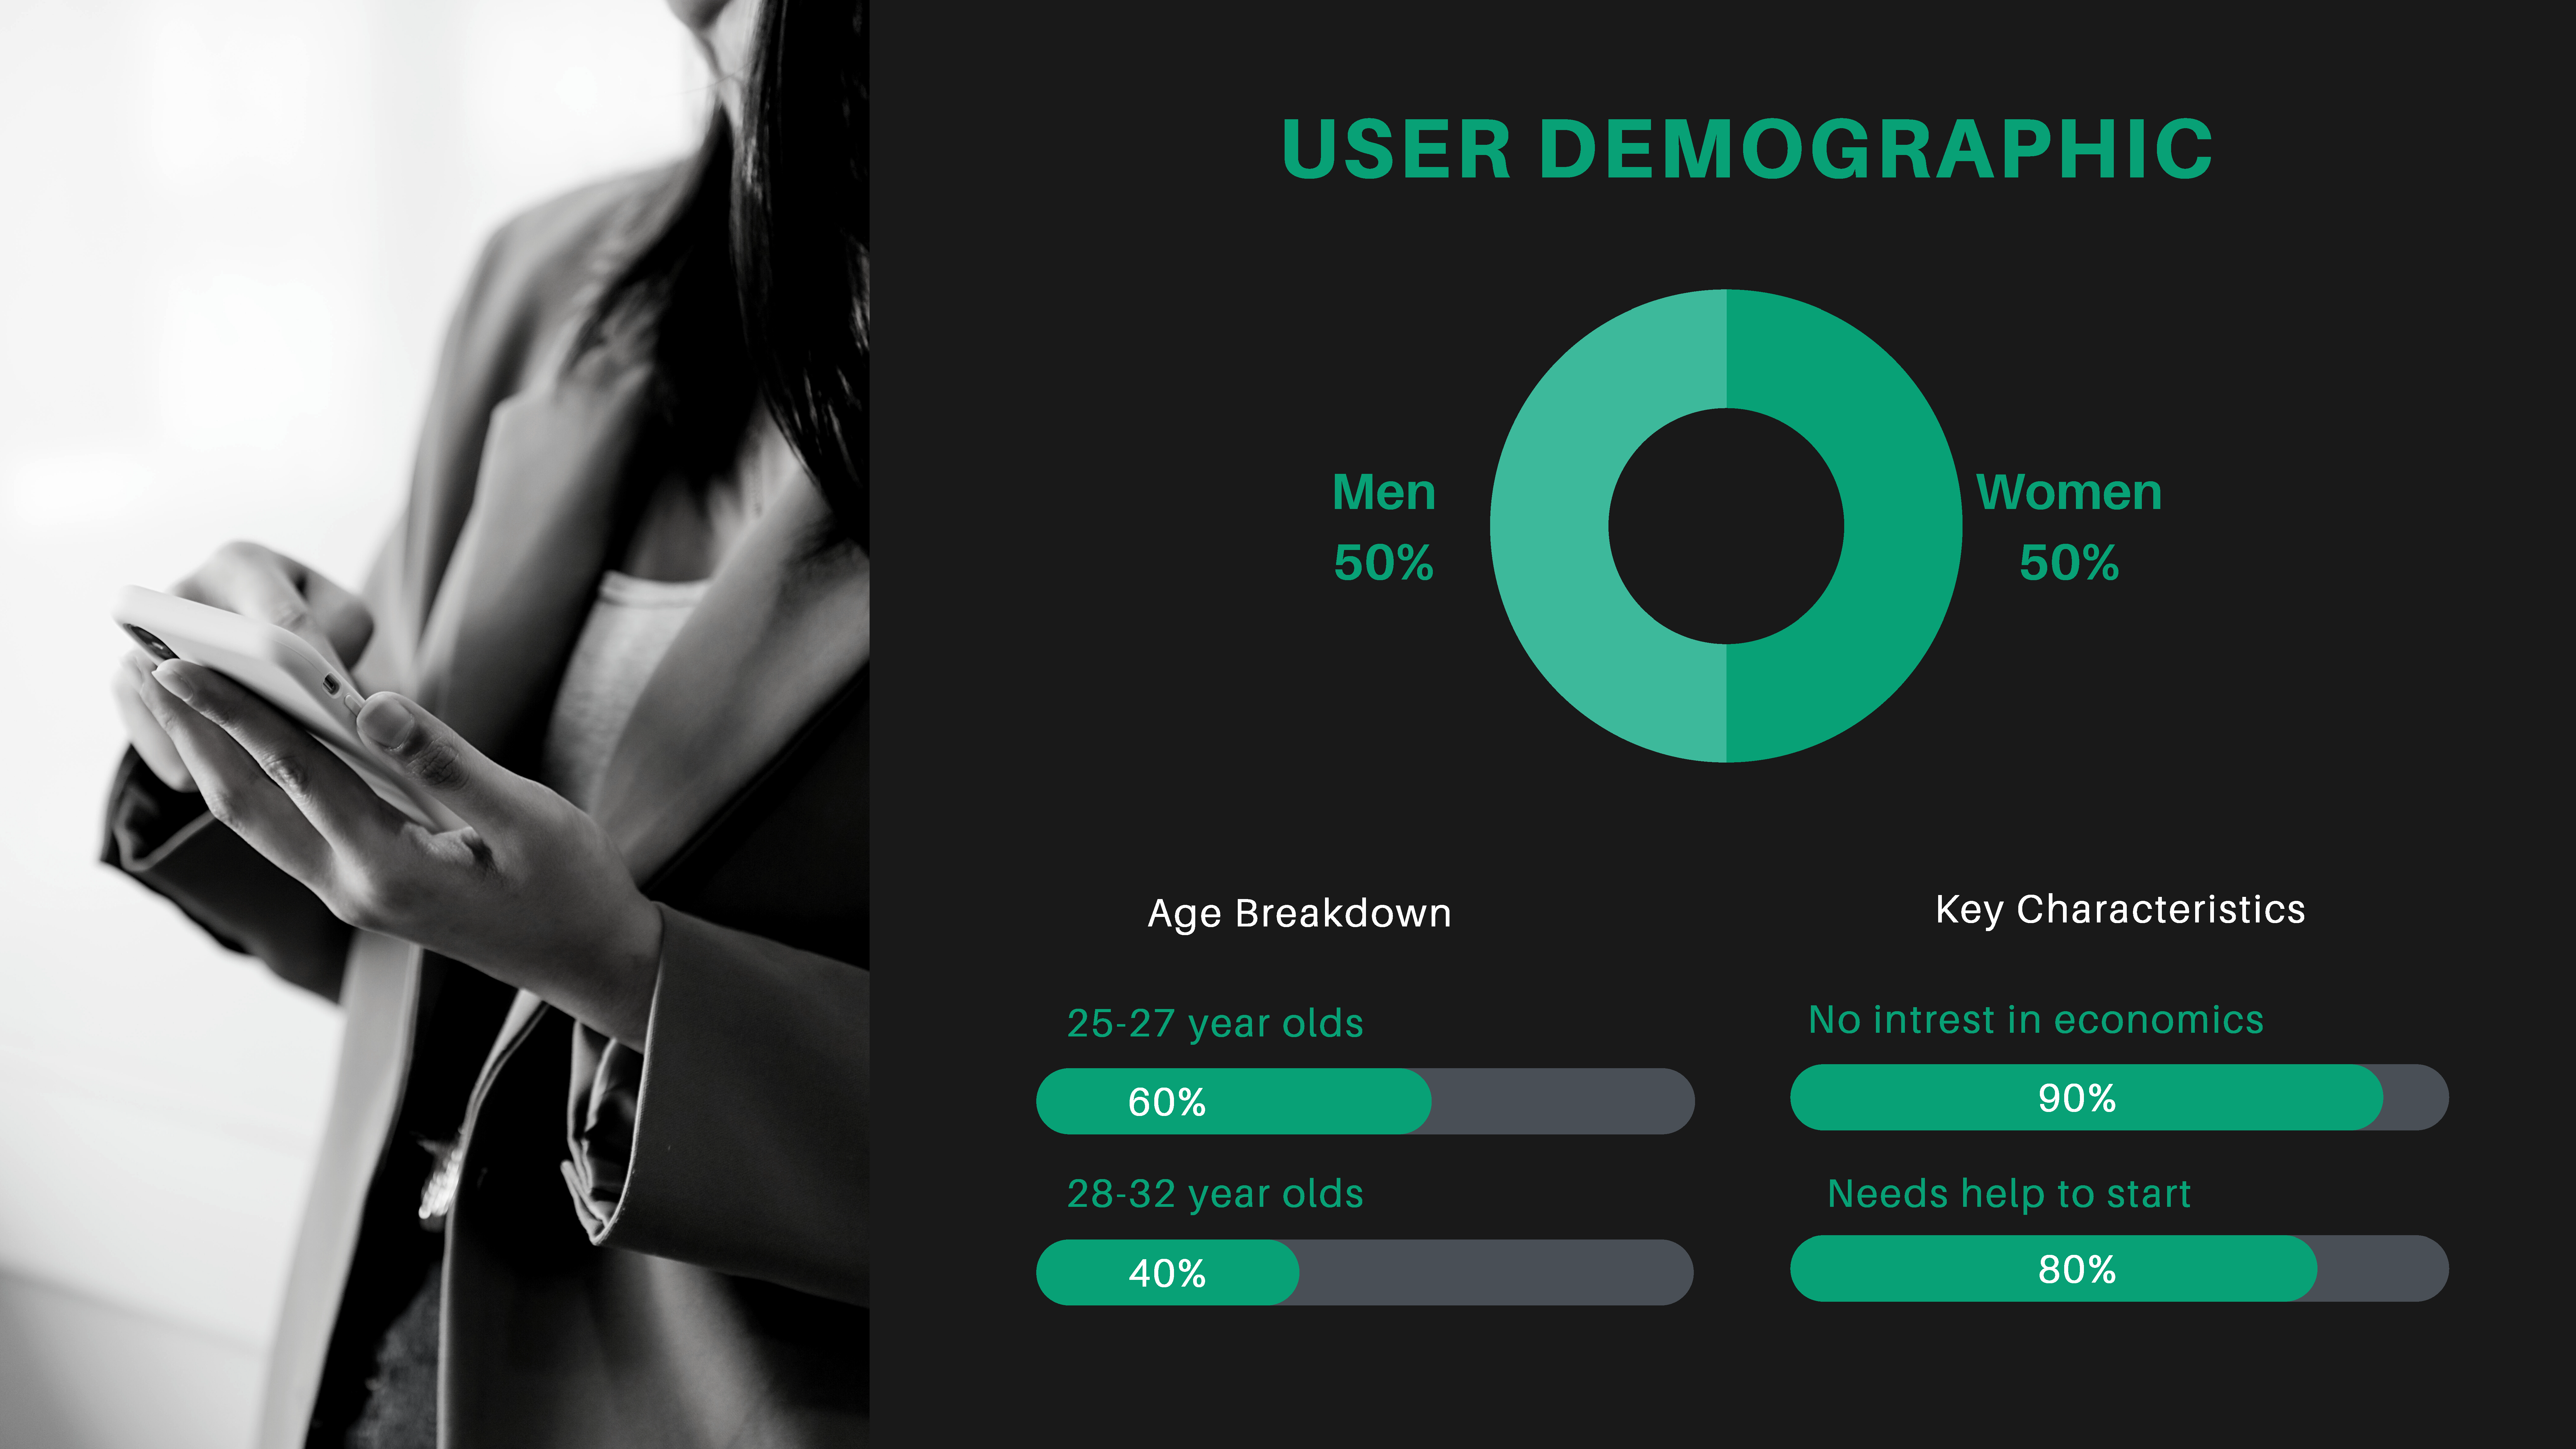 Picture of the test user demographic: 50% women, 50% men. Age Breakdown: 60% 25-27 years old, 40% 28-32 year olds. Key Characteristics: 90% no interest in economics, 80% needs help to start.